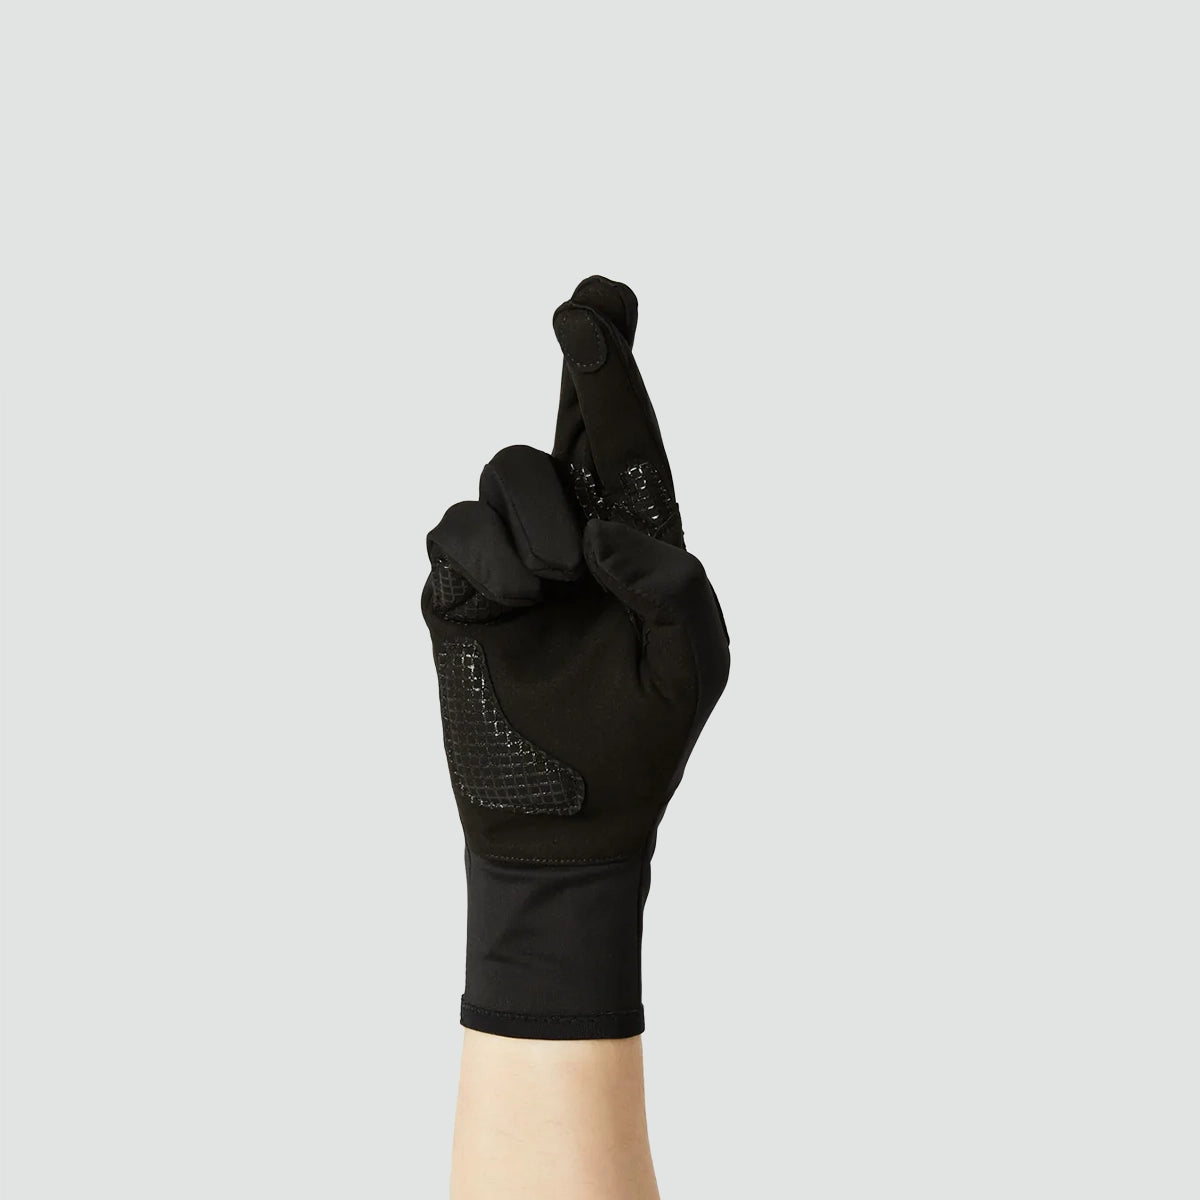 Early Winter Gloves - Black